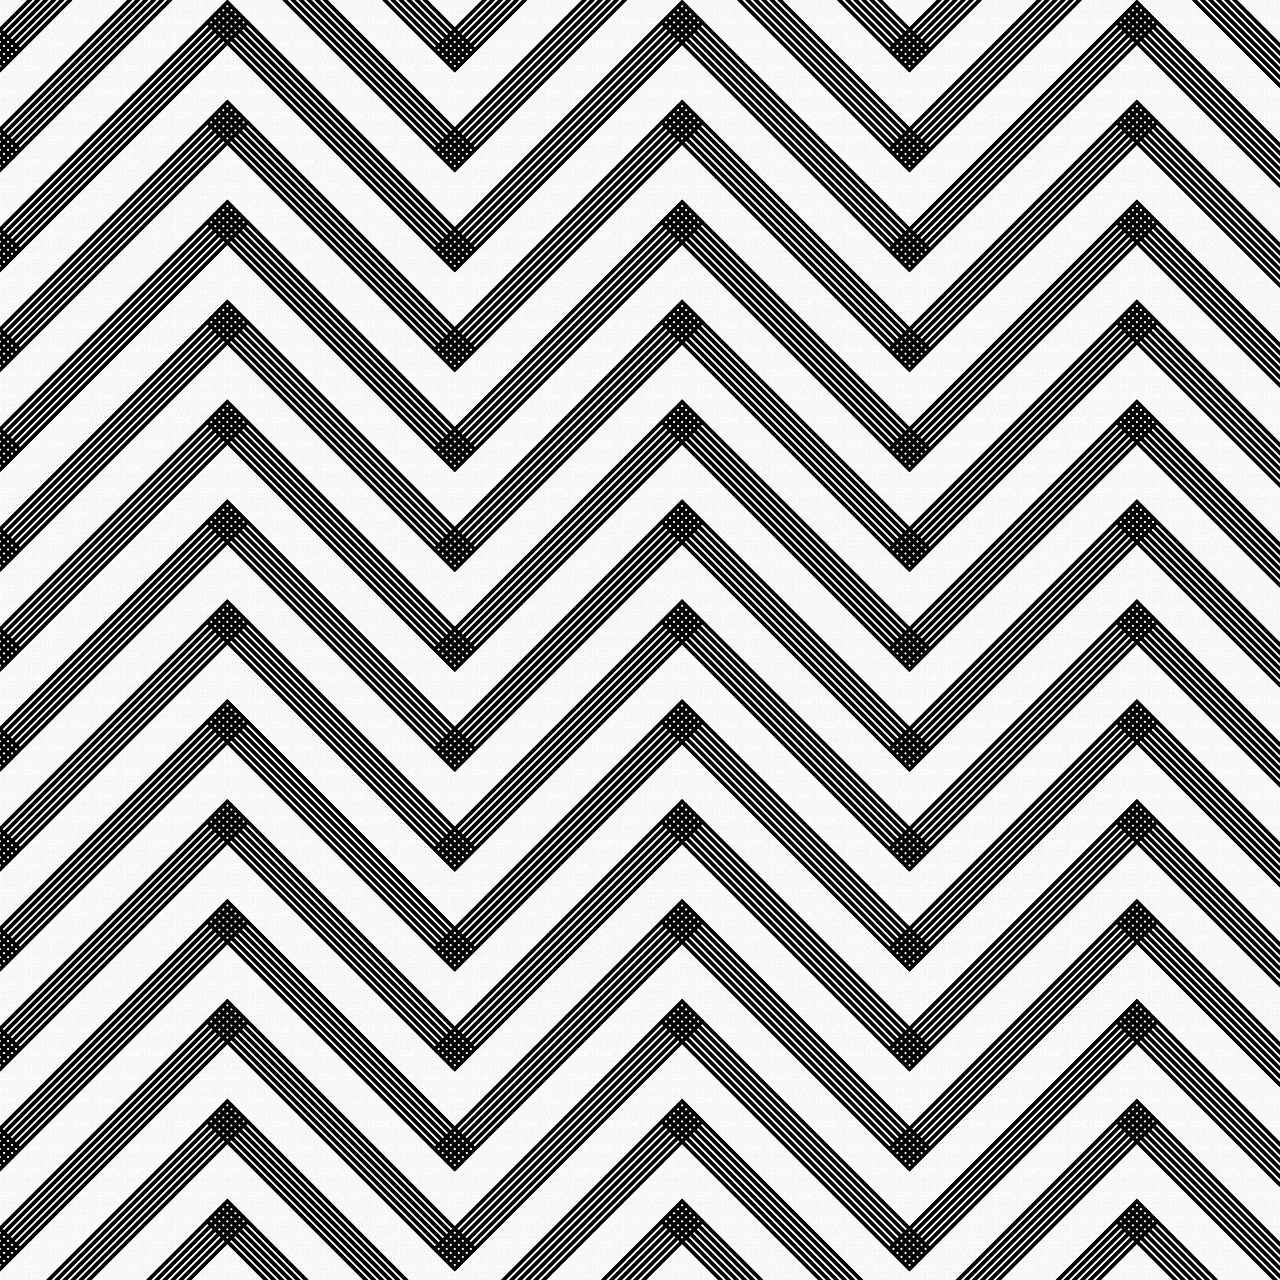 a black and white zigzag pattern, a black and white photo, pixabay, the sims 4 texture, twin peaks poster artwork, 2 0 5 6 x 2 0 5 6, asymmetrical artwork